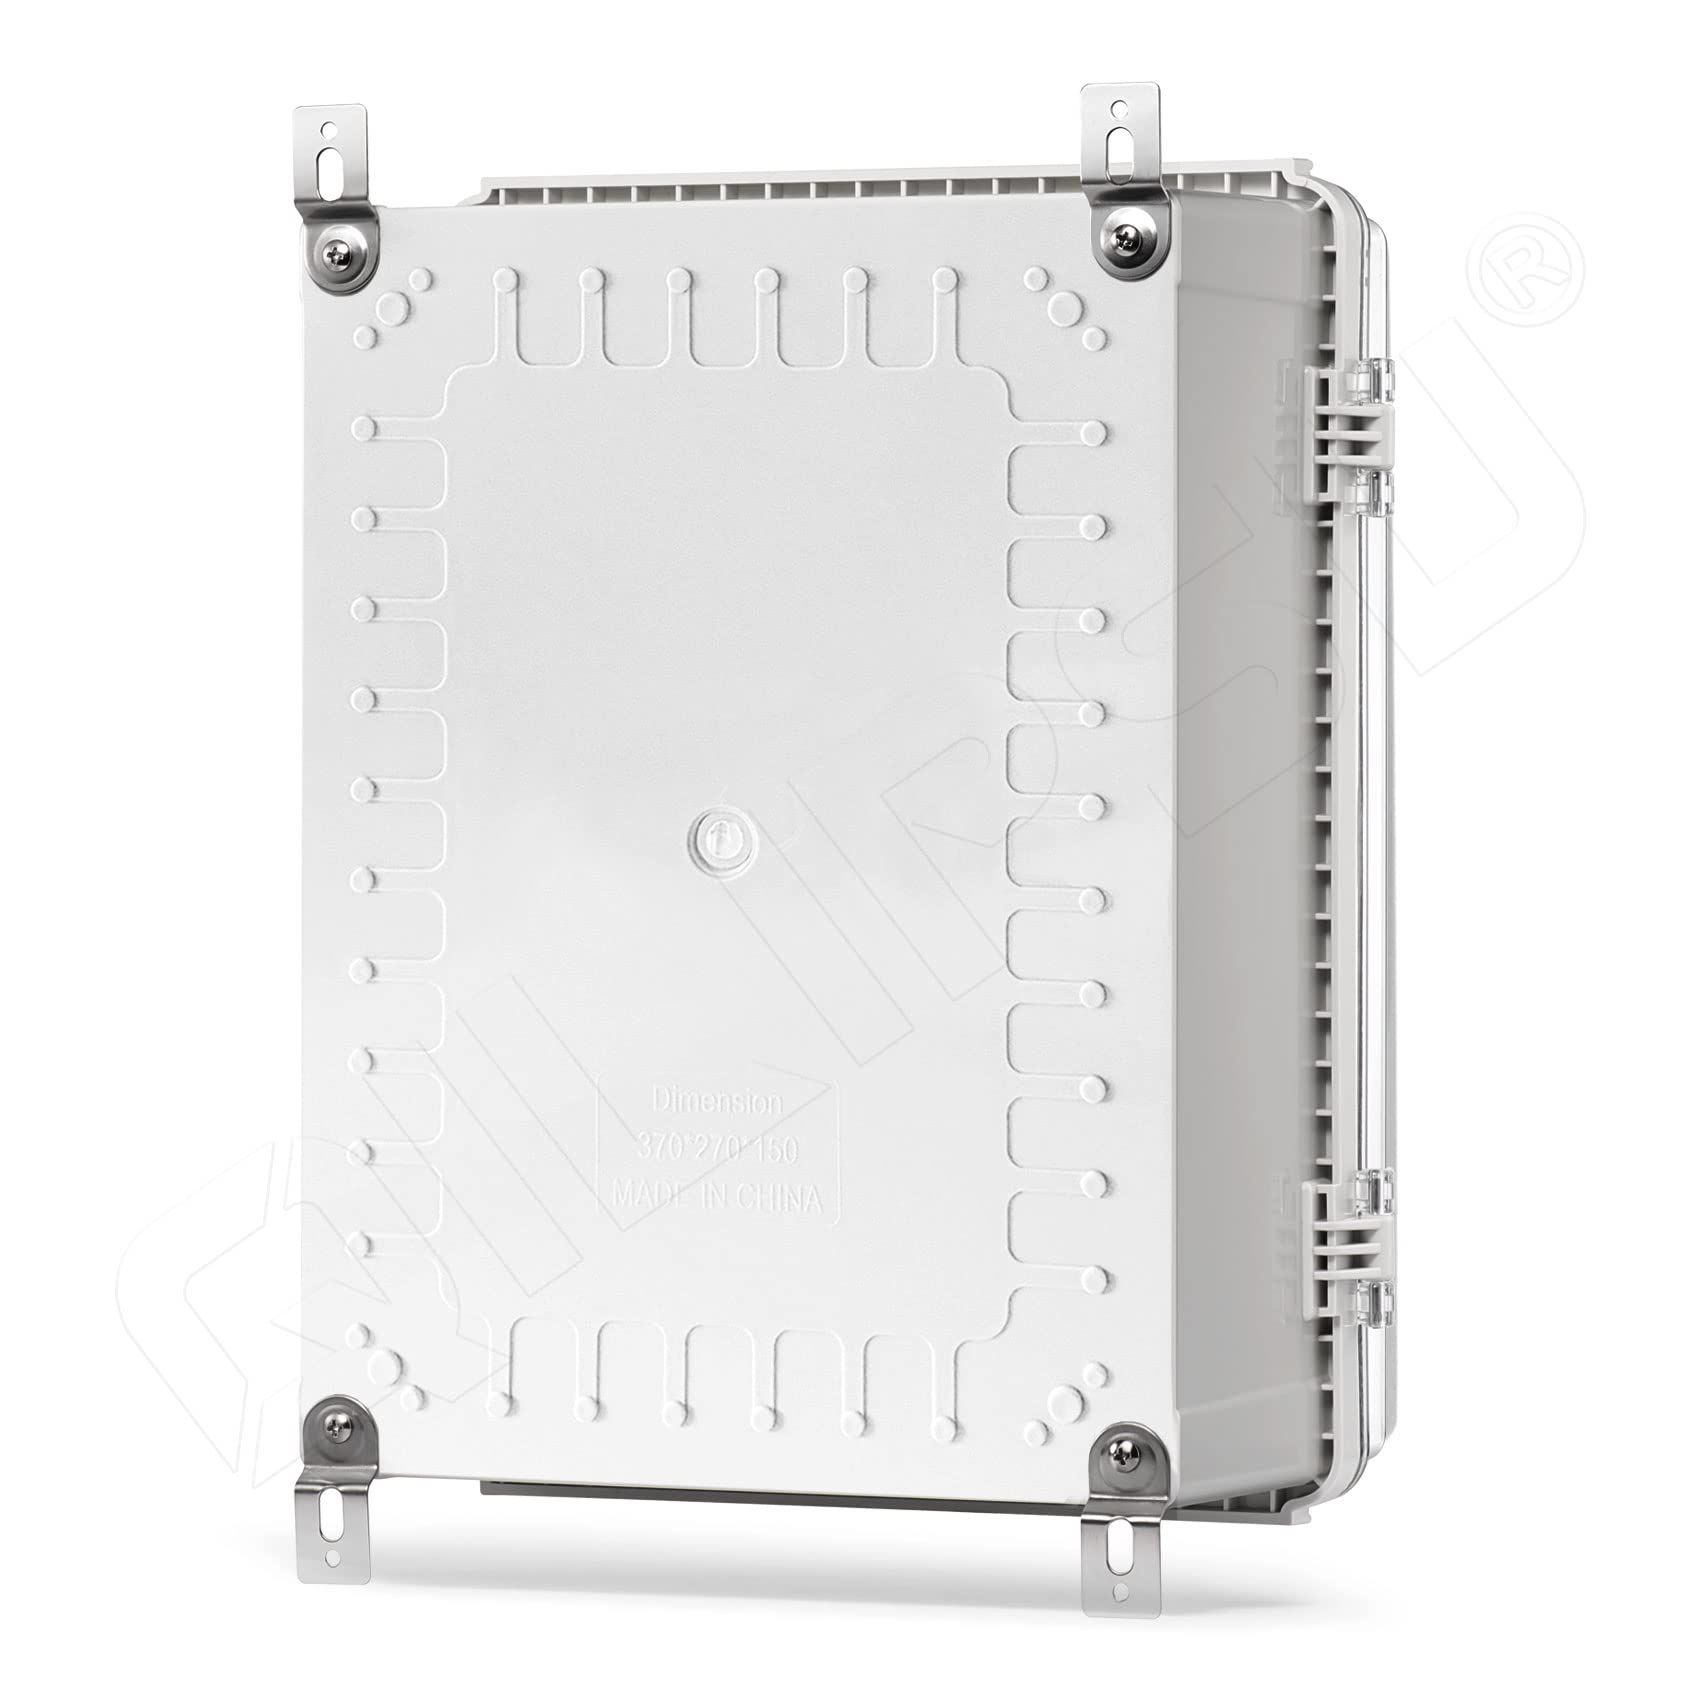 QILIPSU Clear Hinged Cover Stainless Steel Latch 370x270x150mm Junction Box with Mounting Plate, ABS Plastic DIY Electrical Project Case IP67 Waterproof Dustproof Enclosure Grey (14.6"x10.6"x5.9" CC)